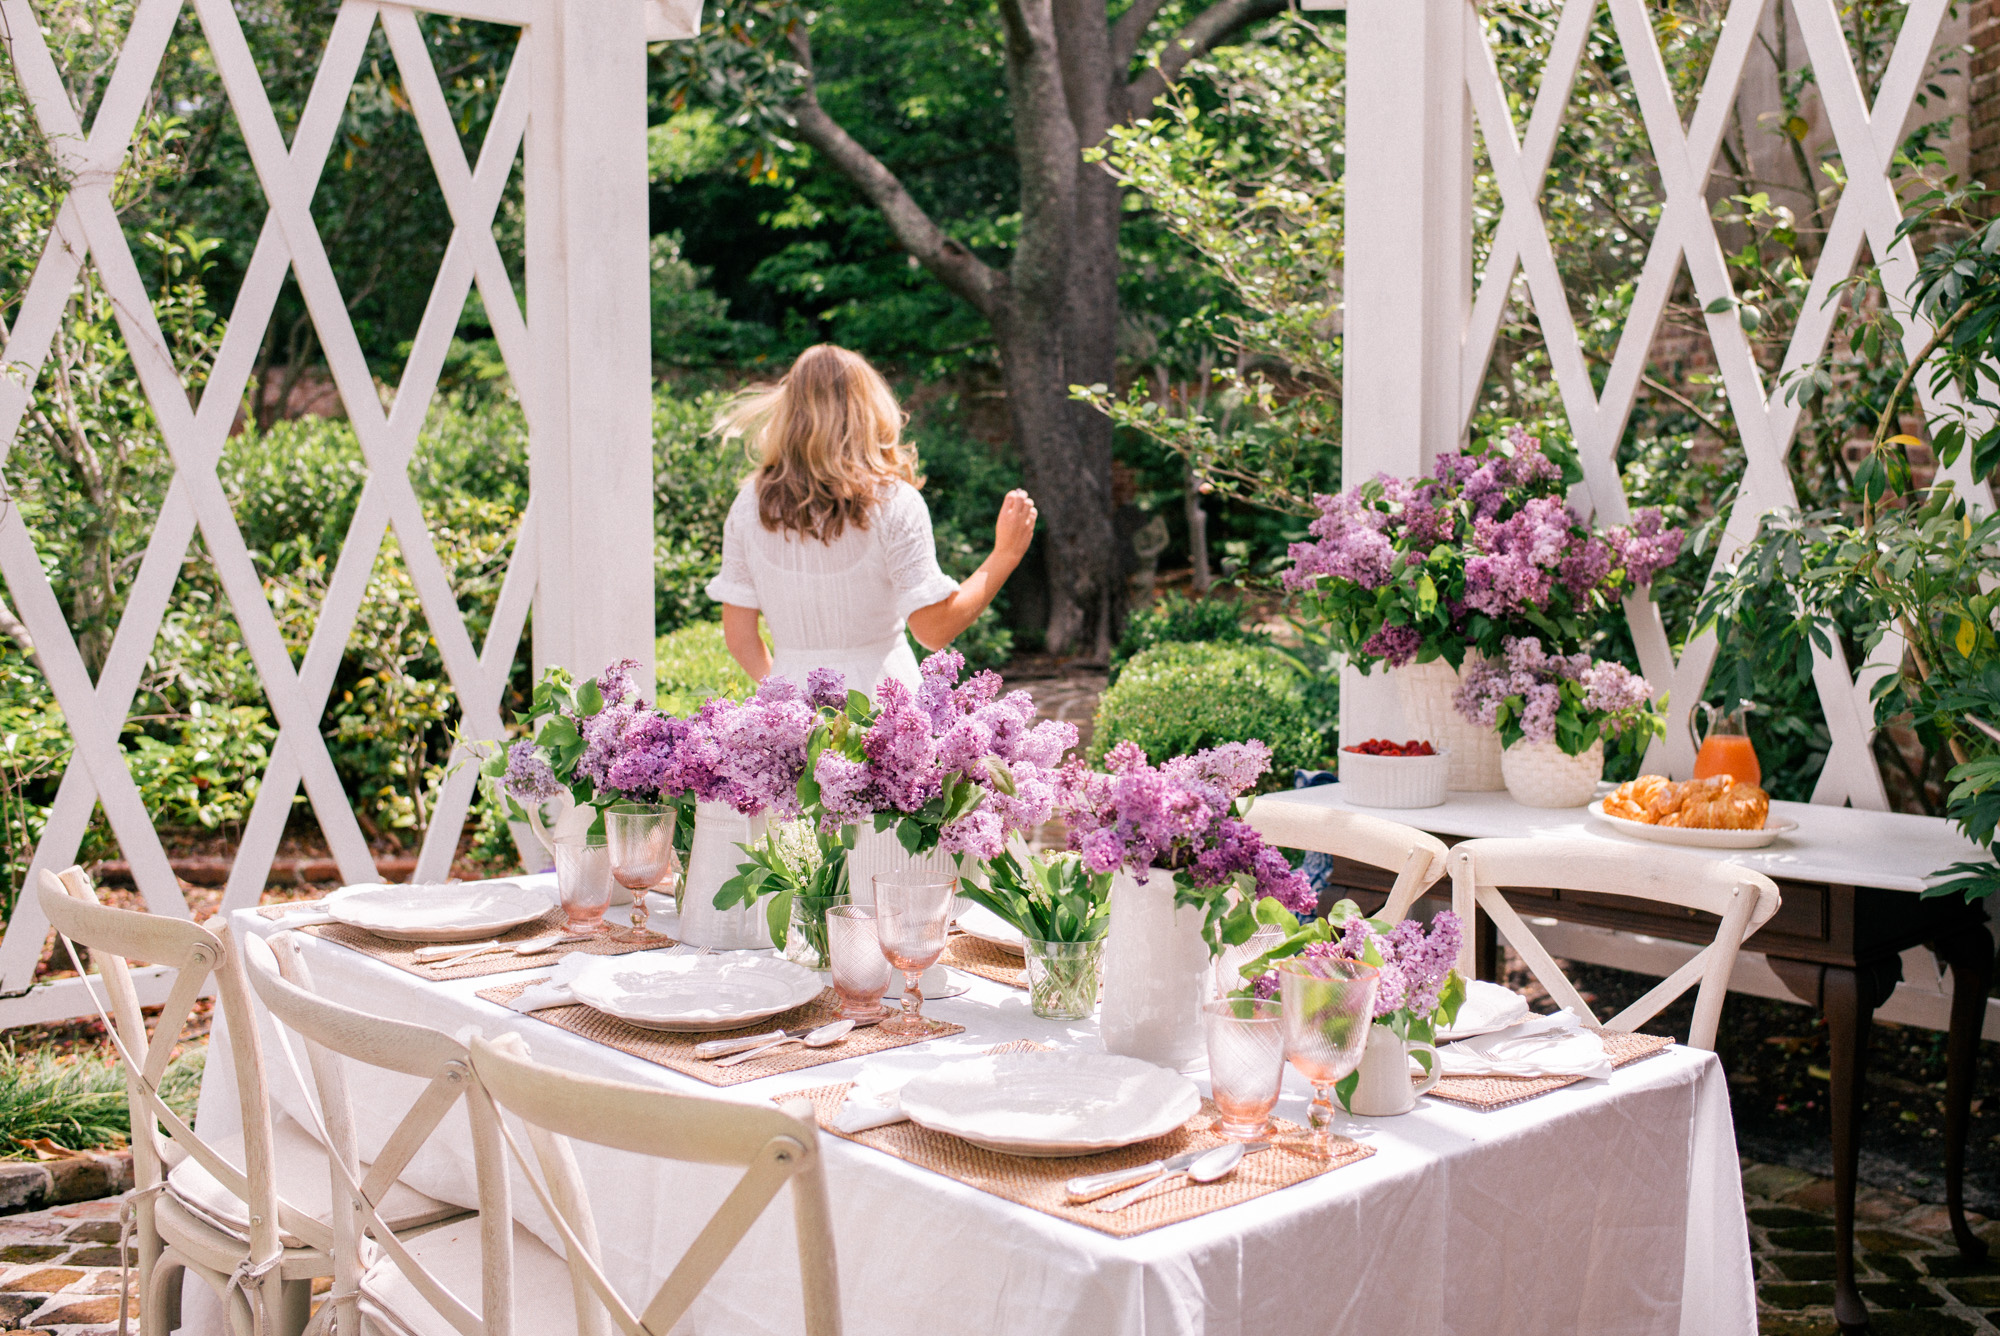 Gal Meets Glam Mother's Day Spring Garden Tablescape